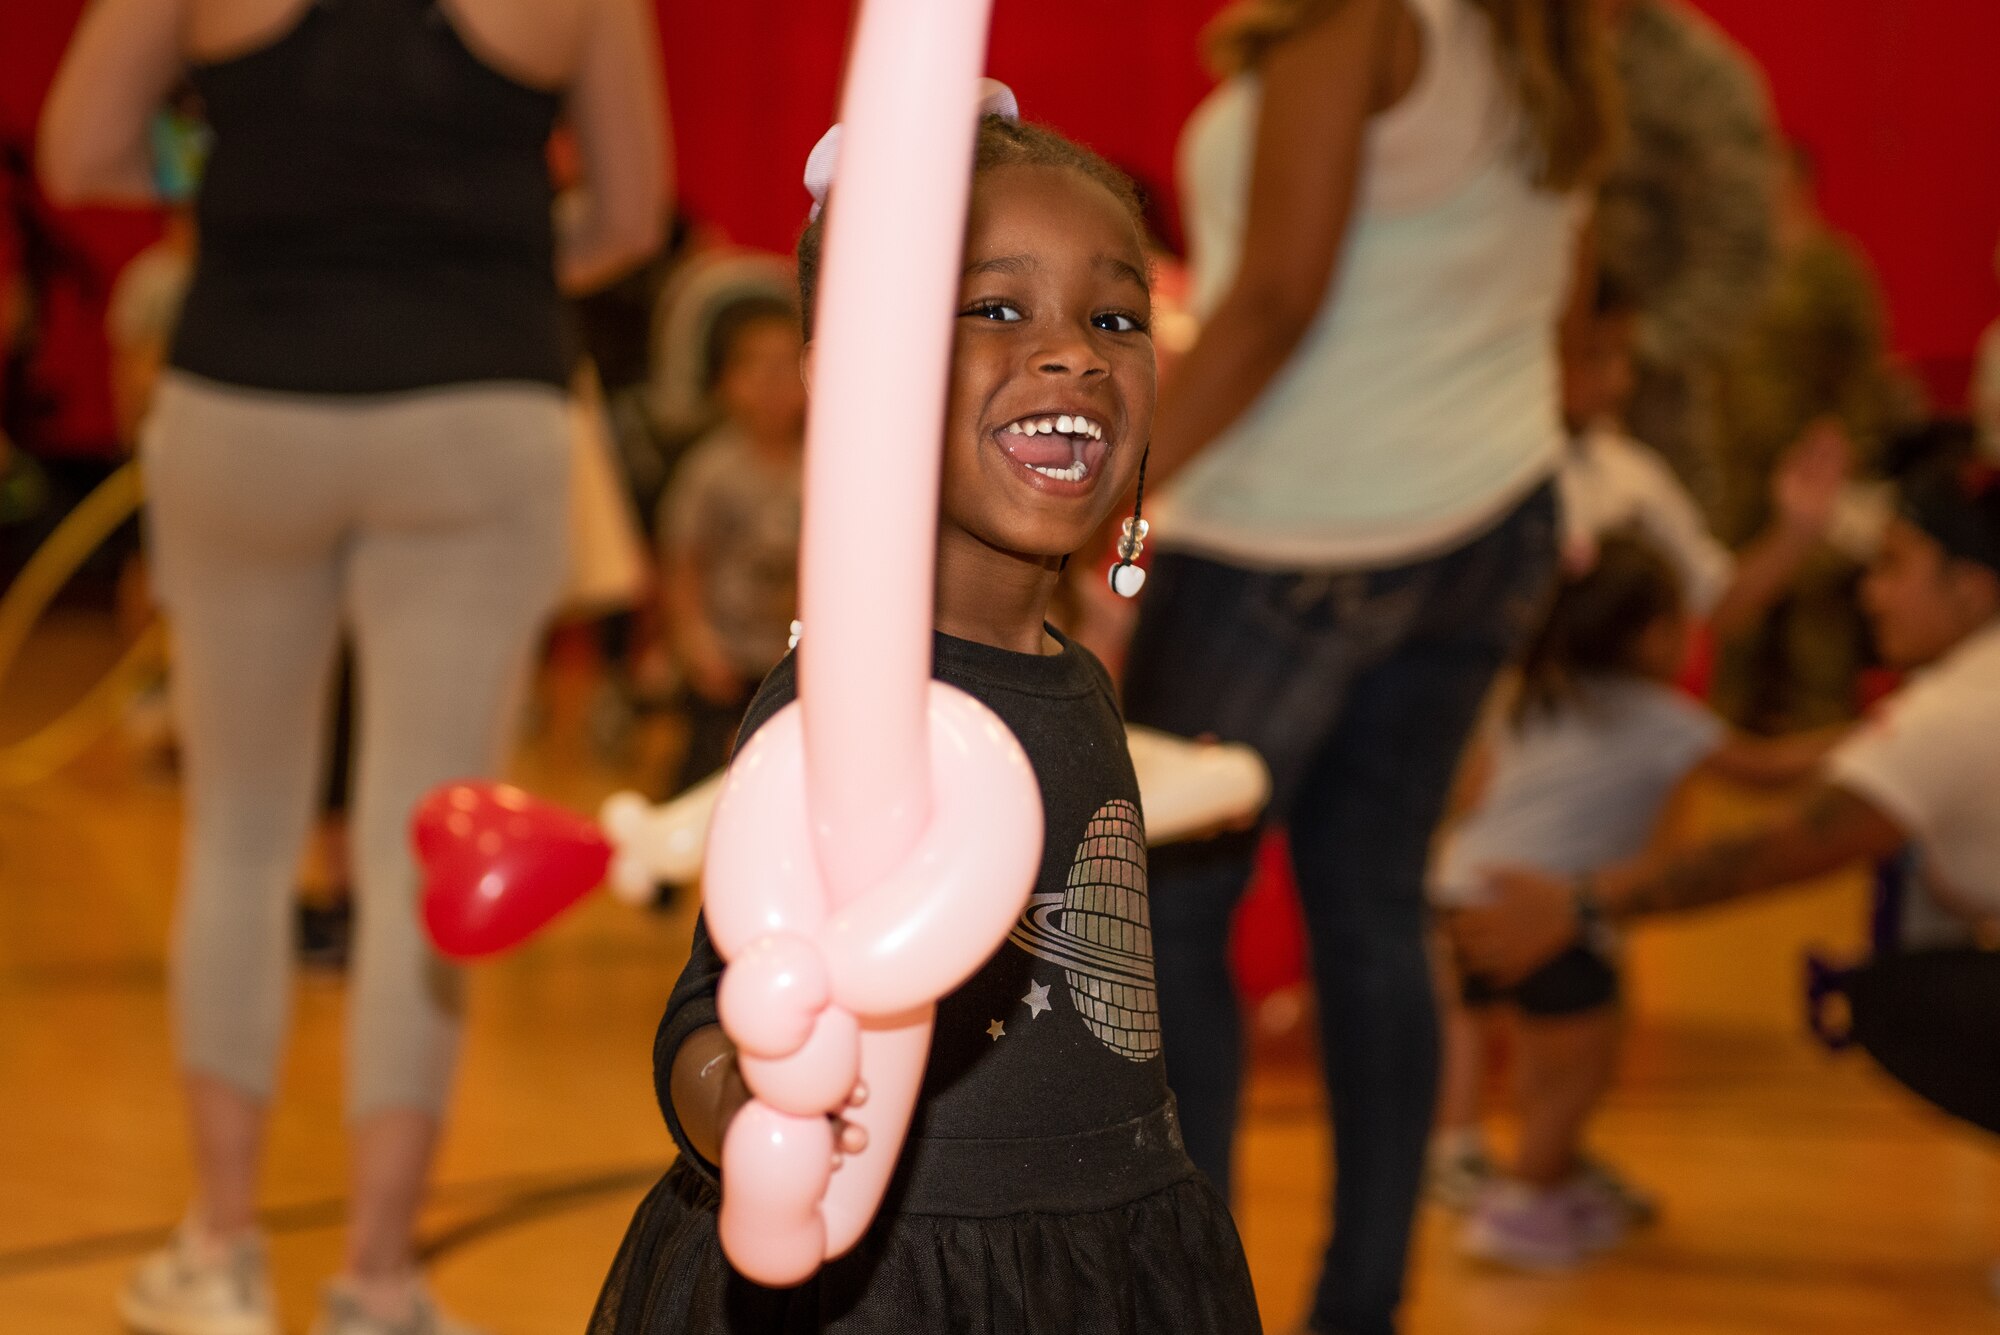 A child poses with her balloon sword at the Month of the Military Child Celebration at Luke Air Force Base, Ariz., April 5, 2019. The event was held to recognize and celebrate military children and their sacrifices while their parents or guardians are serving. (U.S. Air Force photo by Airman 1st Class Leala Marquez)